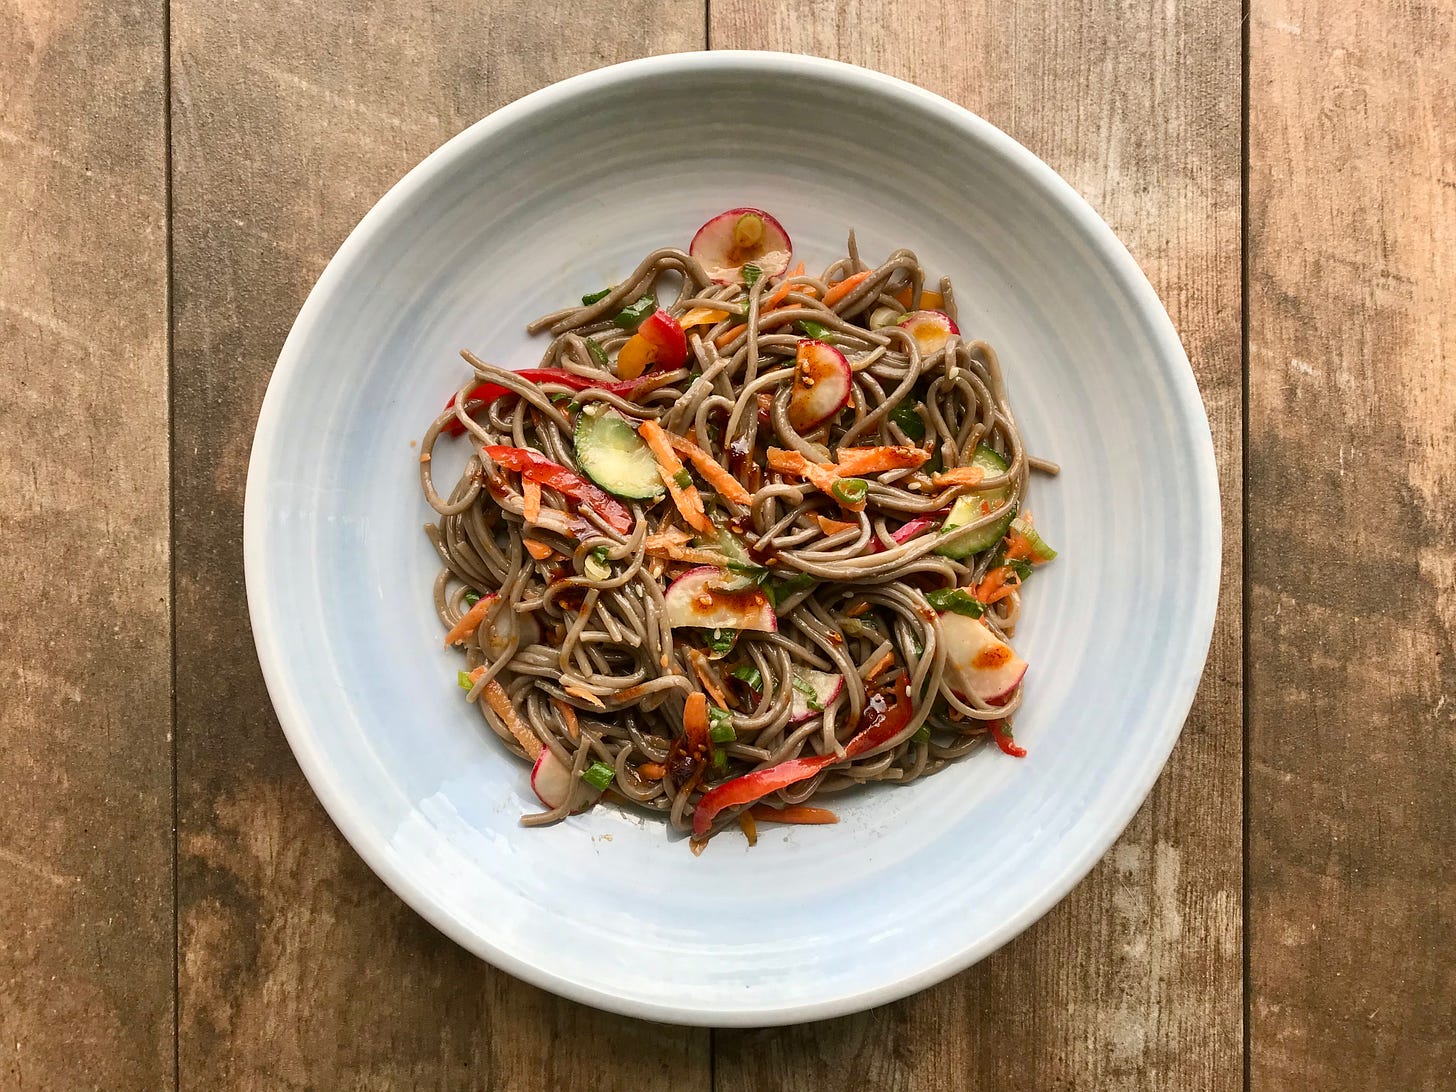 Thin slices of cucumber and radish with slivers of red and orange sweet peppers, carrot shreds and sliced spring onions are tangled in tresses of buckwheat noodles. It’s sprinkled with coriander leaf, sesame seeds and dotted with chilli crisp.